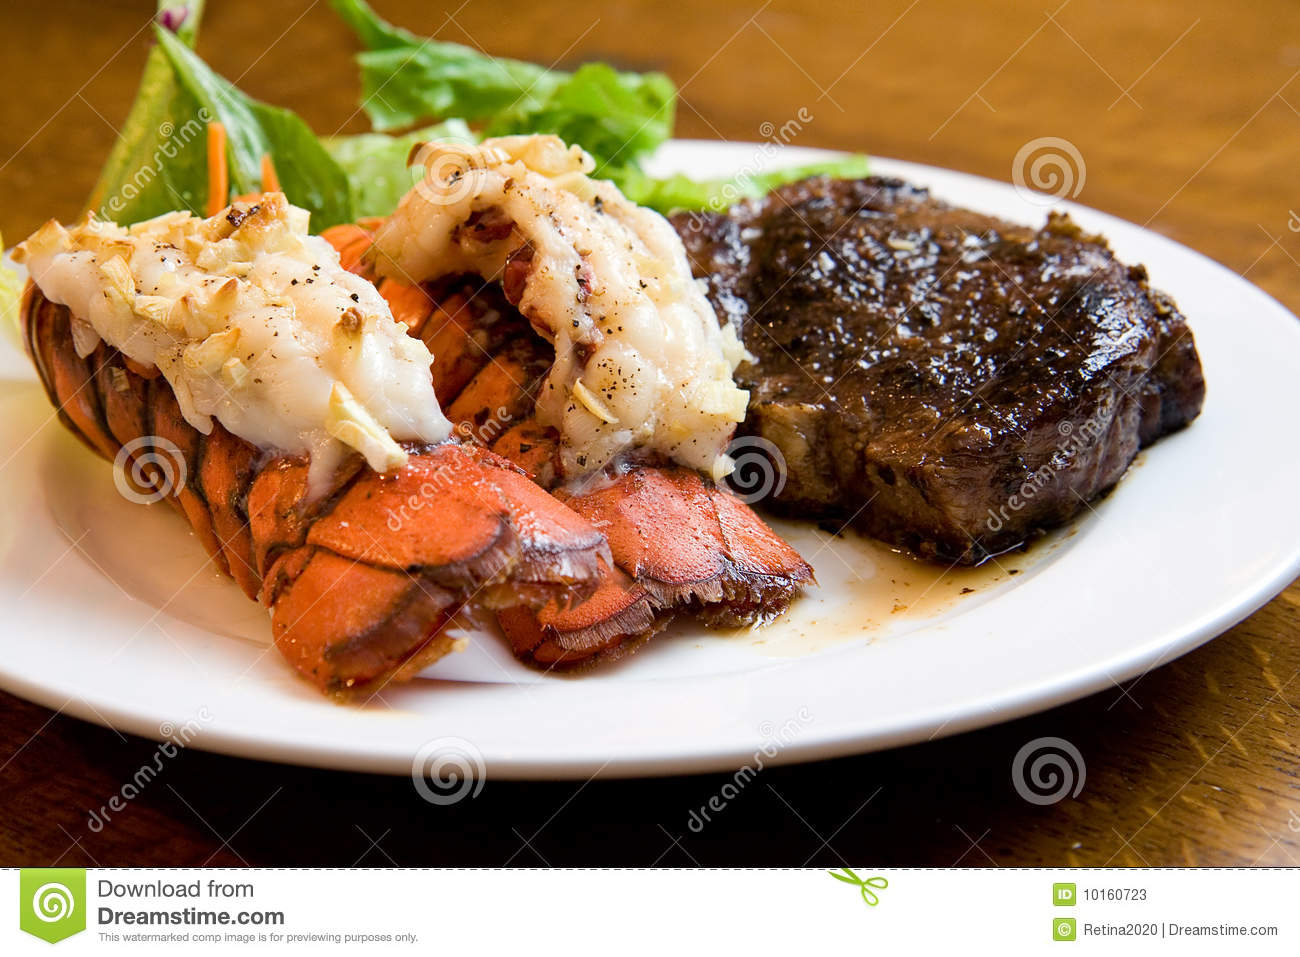 Lobster And Steak Stock Photos   Image  10160723